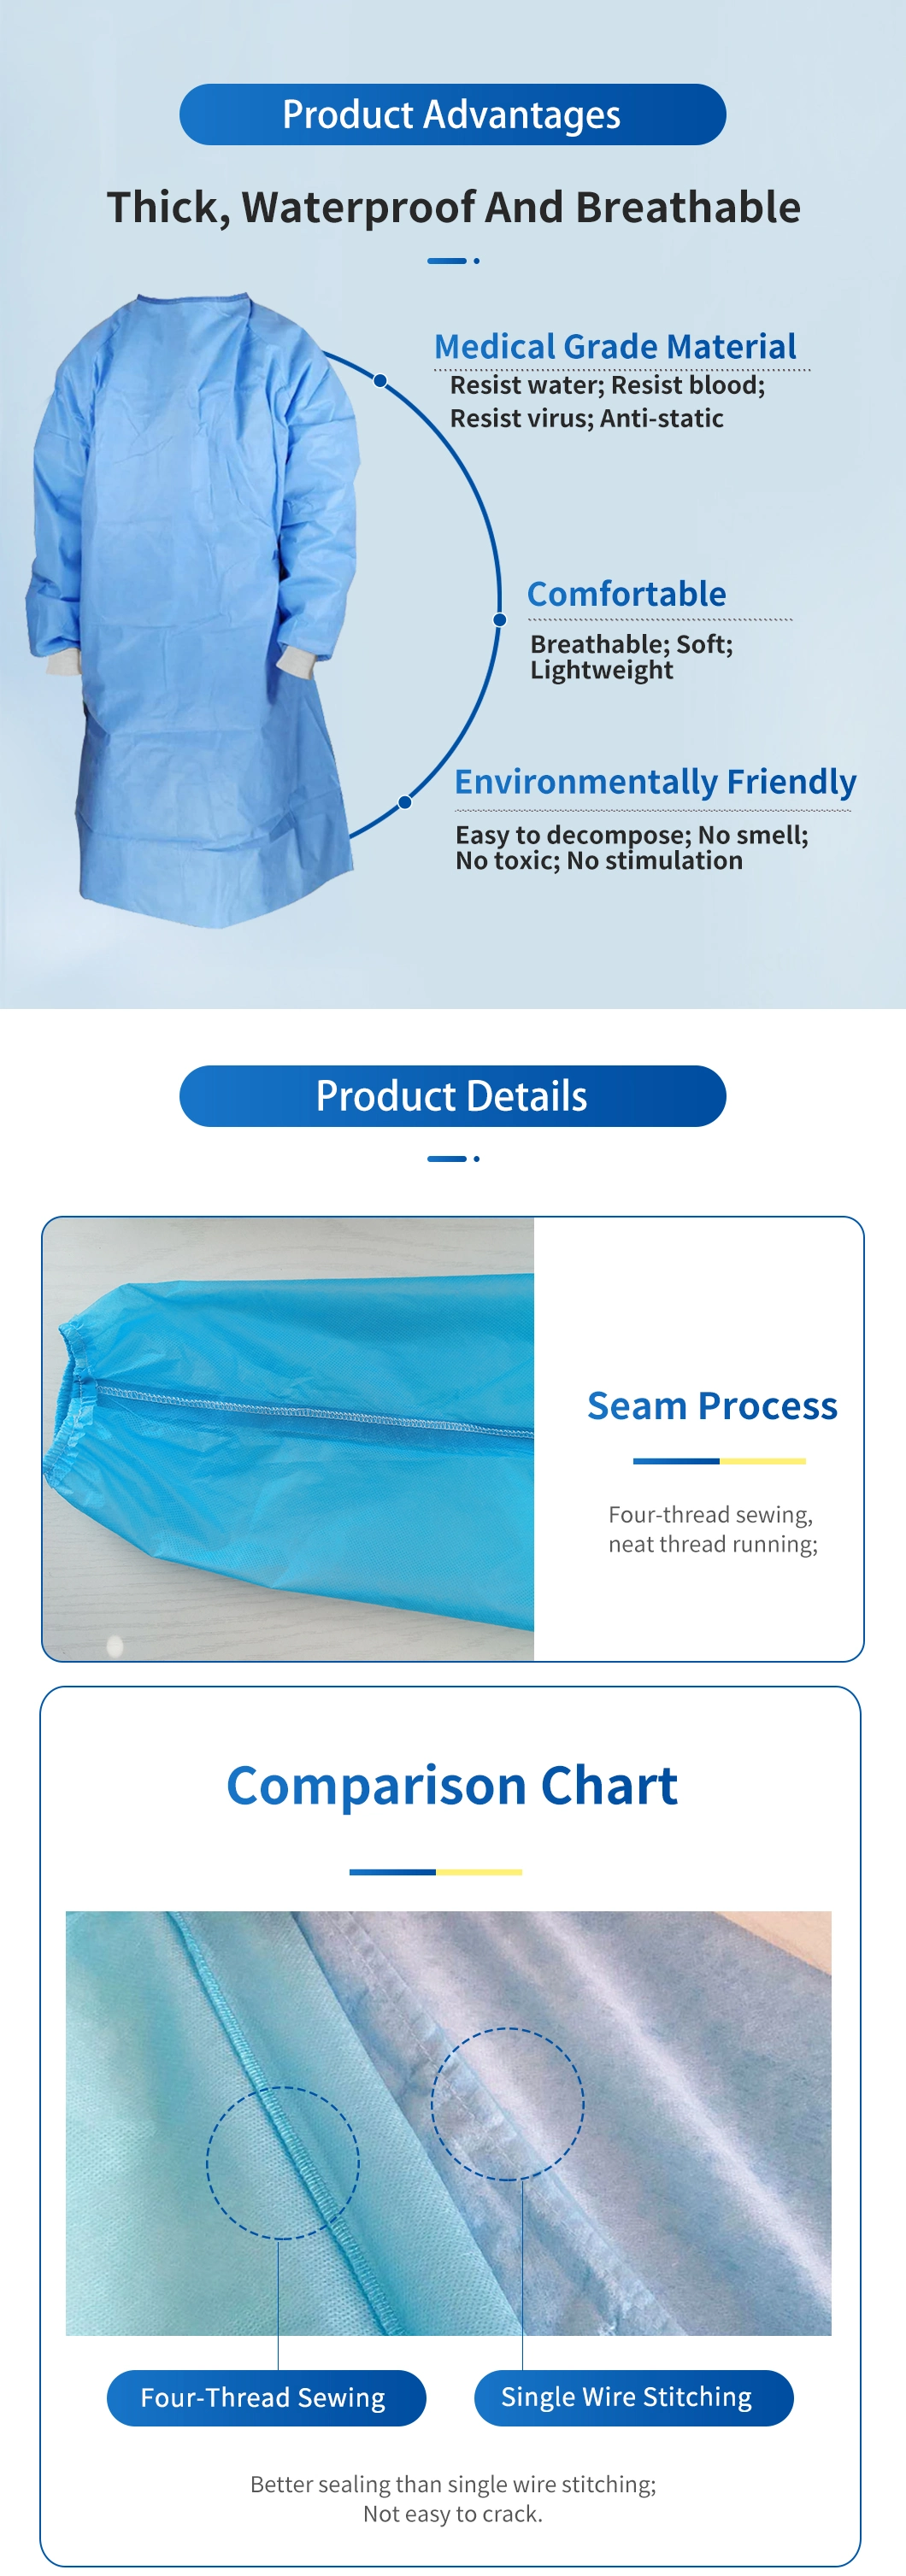 Disposable Apron Protective Gown Disposable Isolation Gown with Thumb Cuff/Elastic Cuff/Knit Cuff